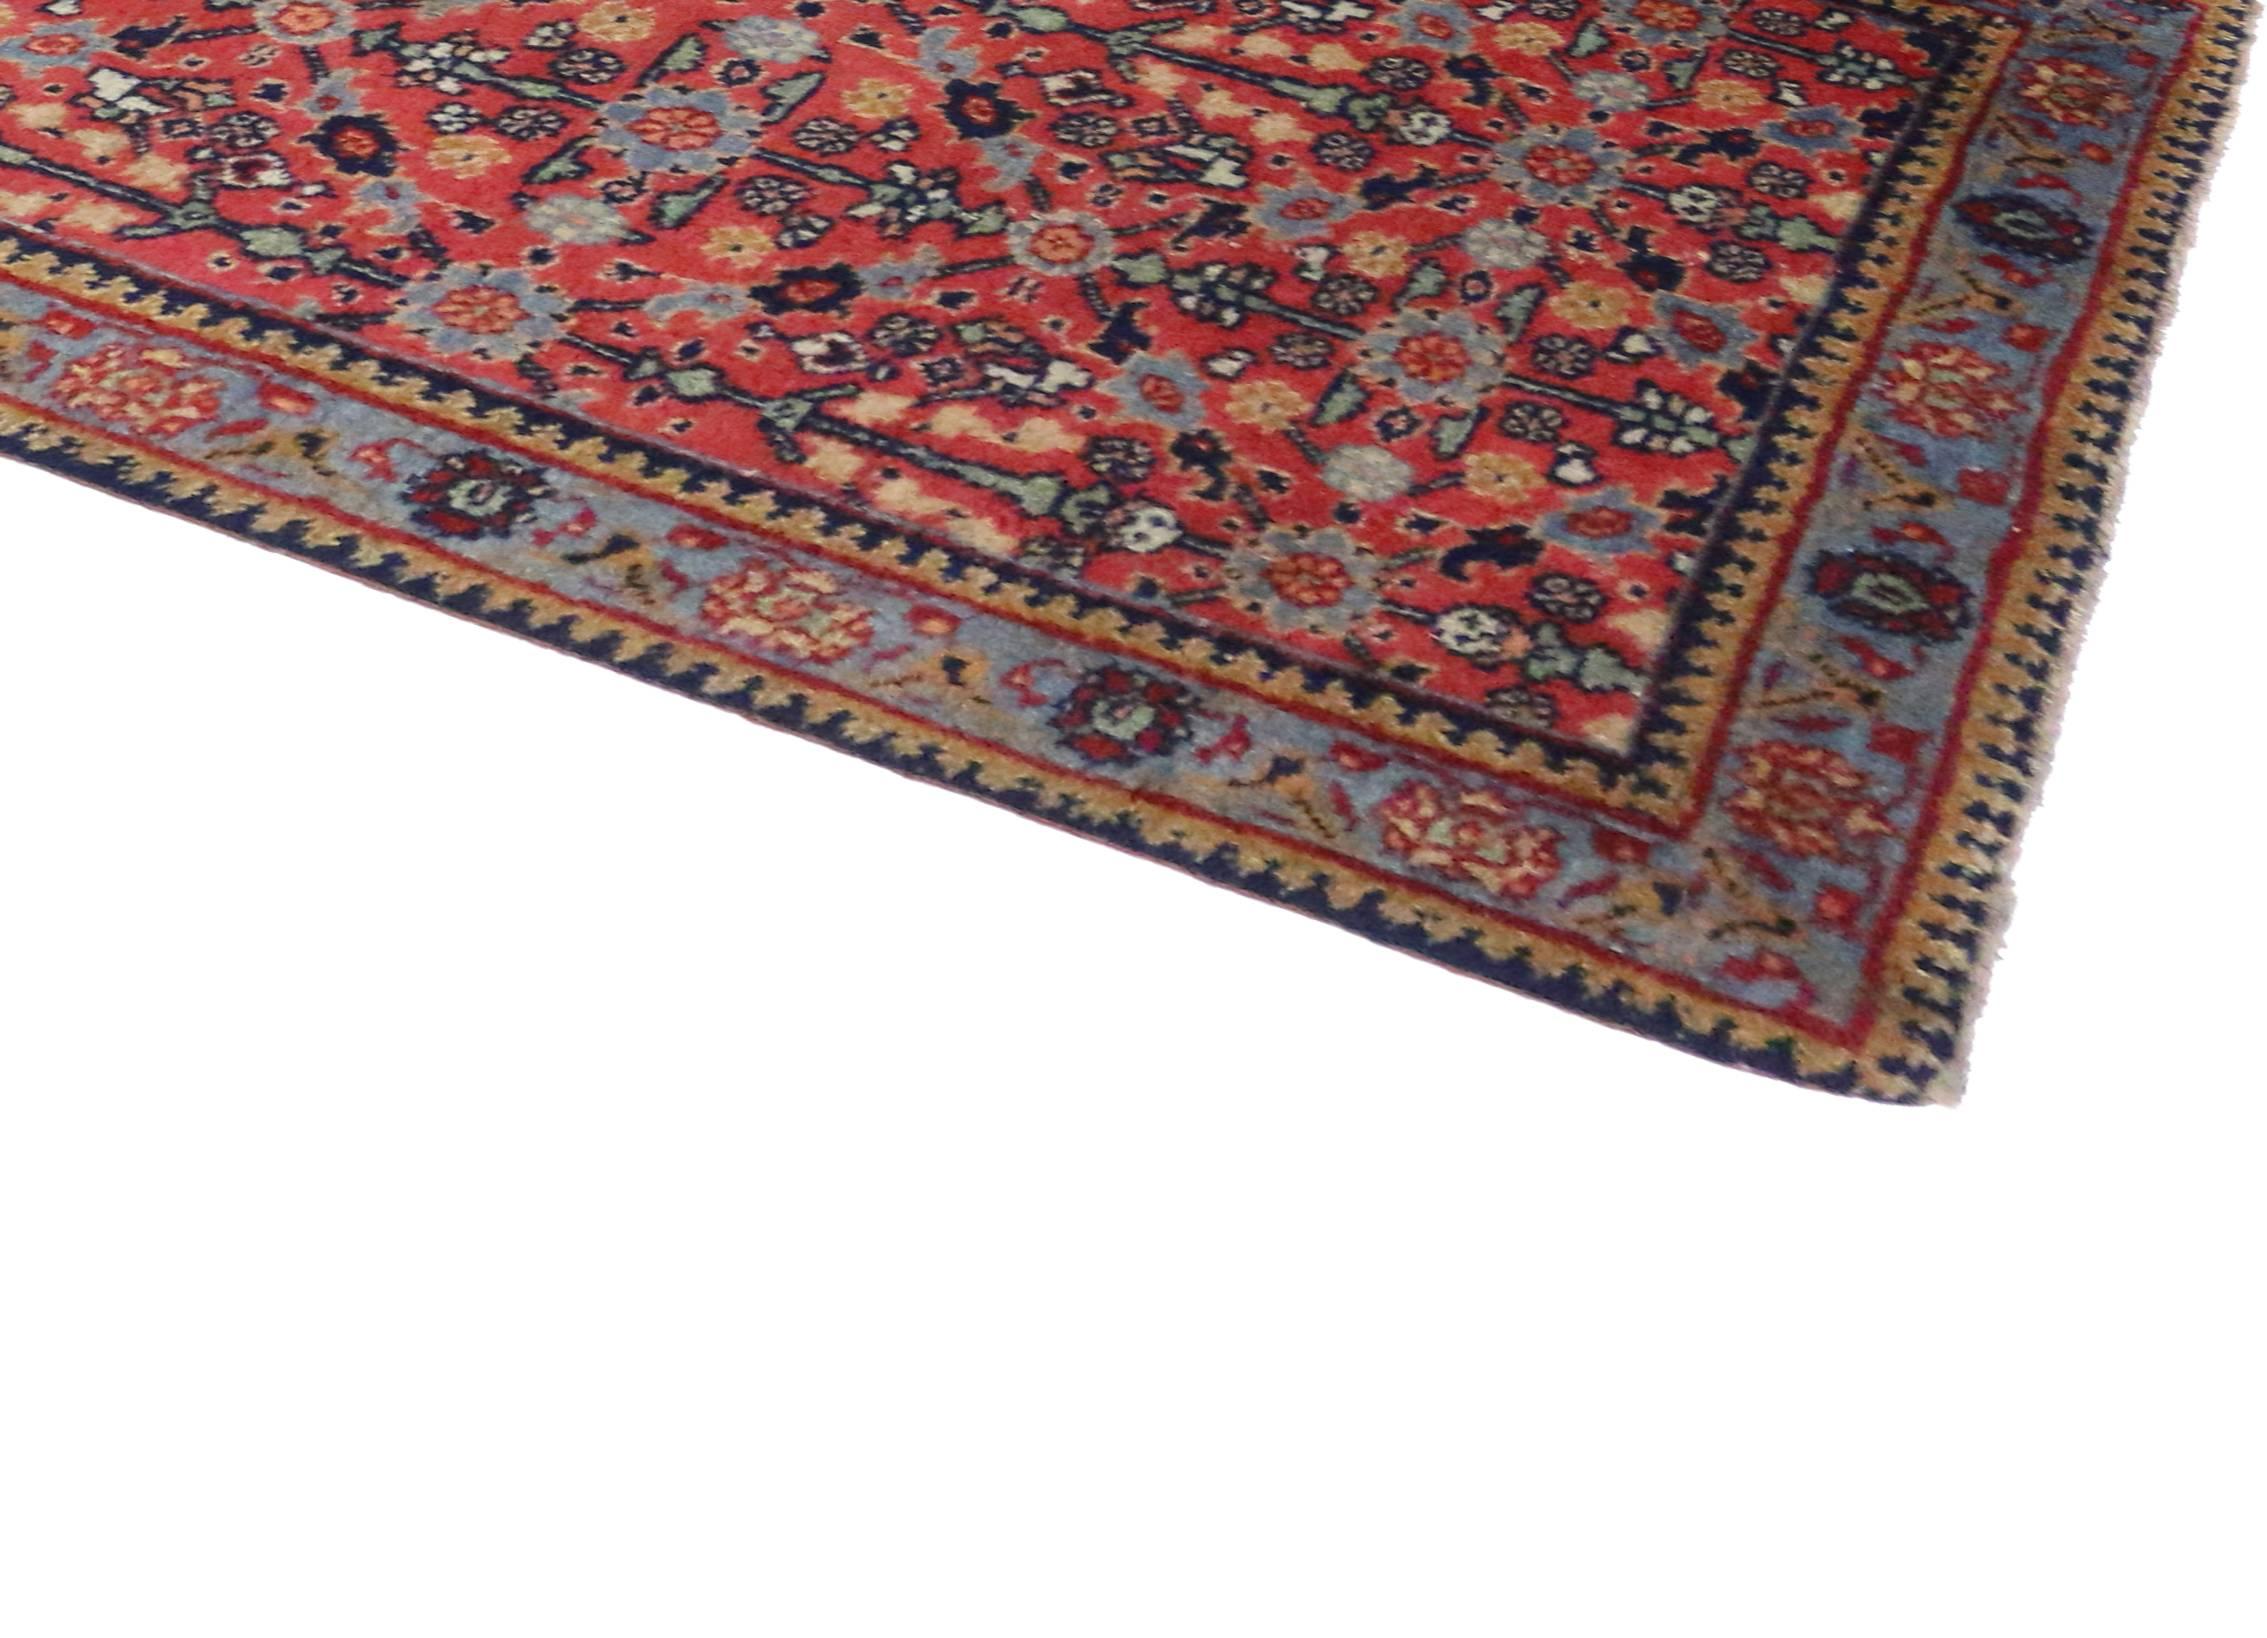 Antique Persian Tabriz carpet runner with modern traditional style featuring an all-over floral pattern in a refined palette consisting of soft red, light blue, dark blue, mint green and tan. Decorative palmettes and the masterful color combinations